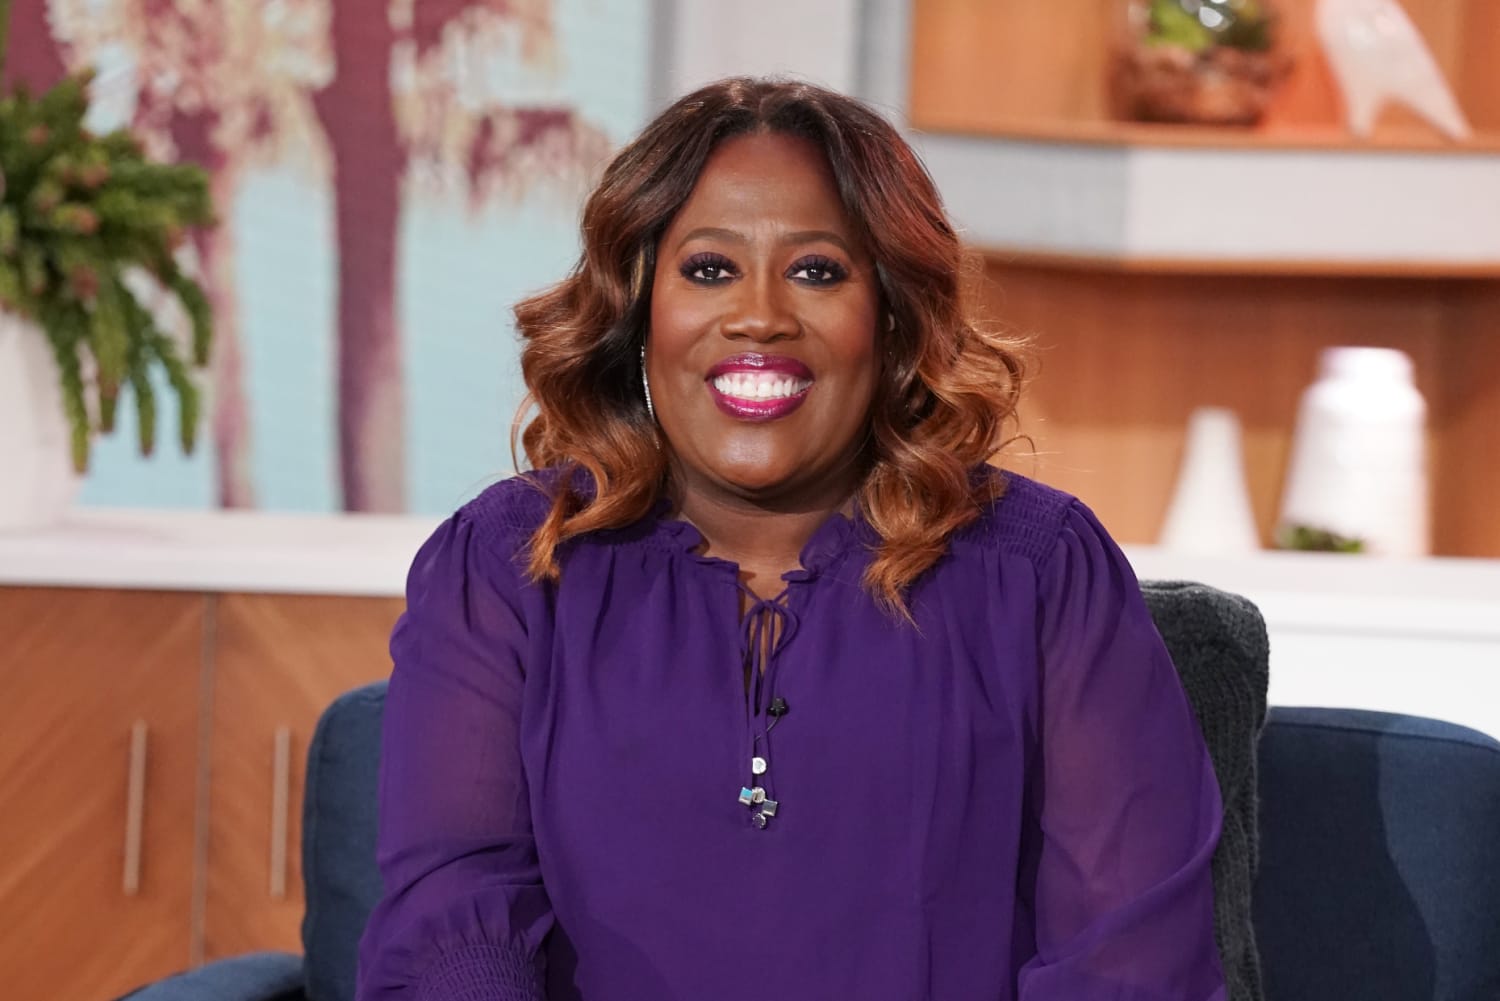 Sheryl Underwood breaks silence after Sharon Osbourne's exit from 'The Talk'